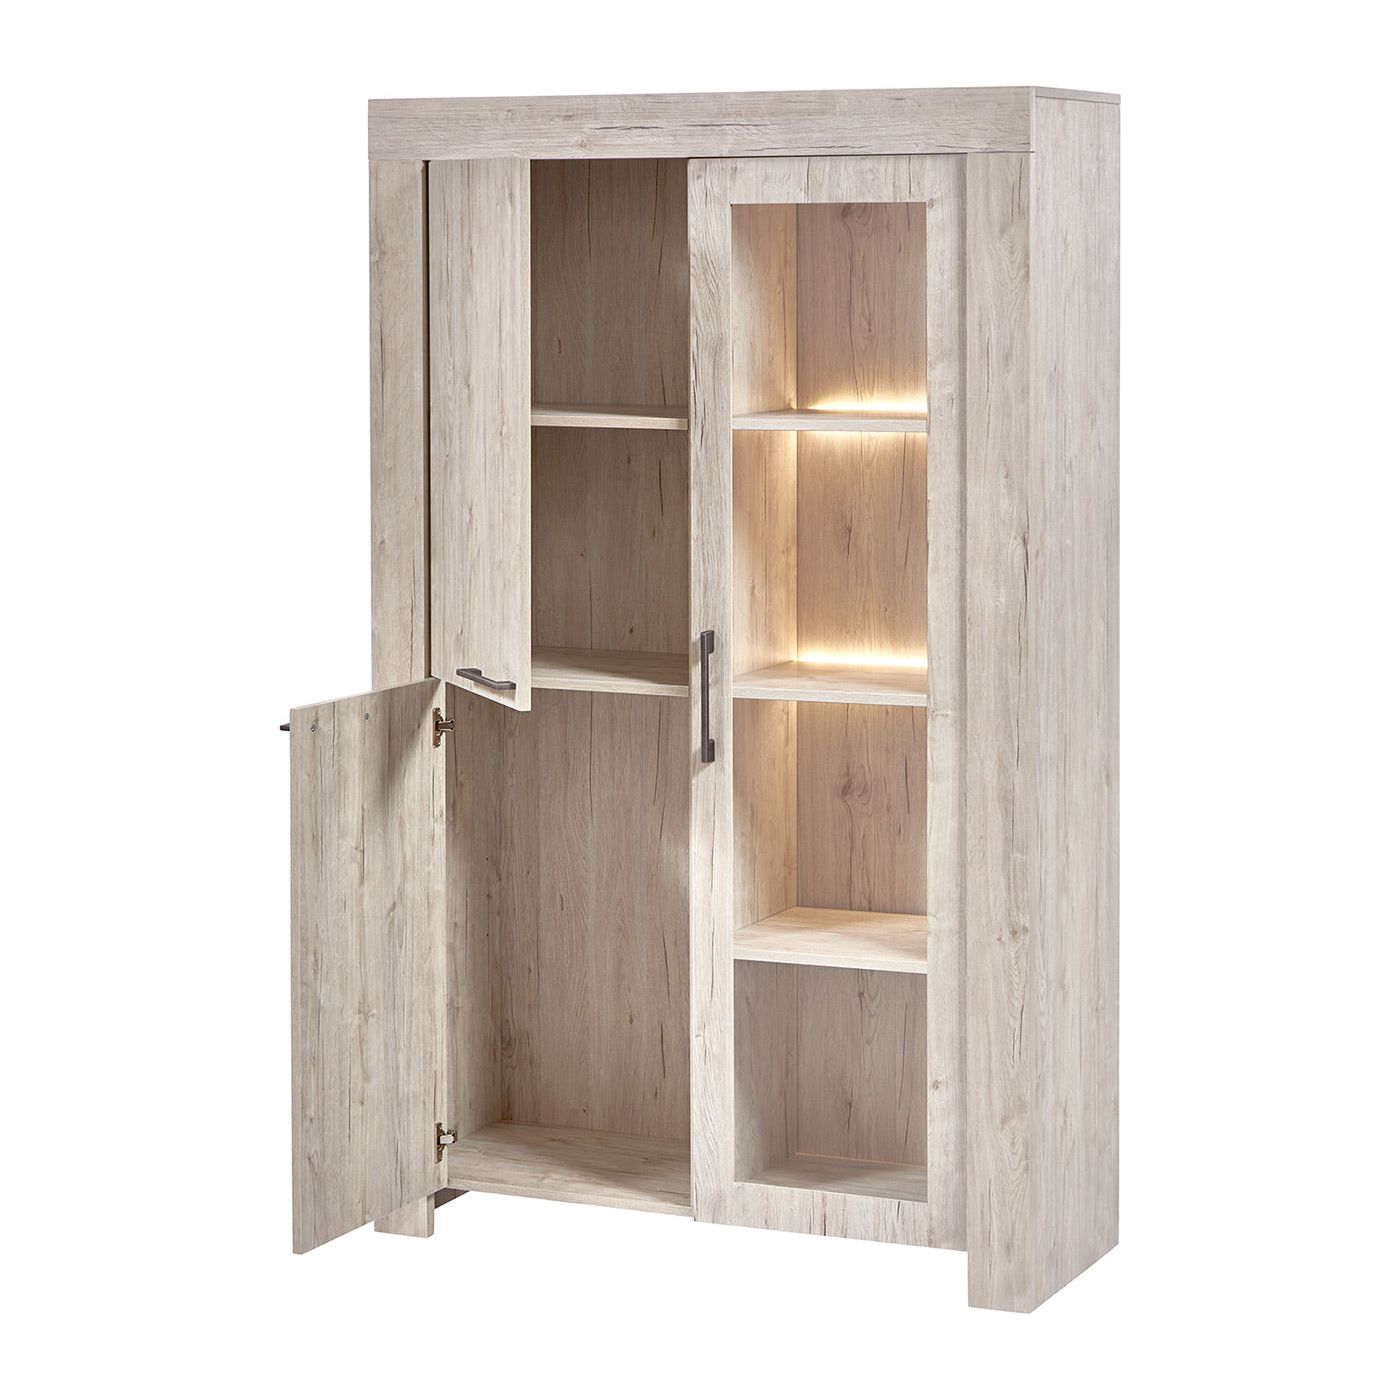 Wall cabinet with LED lighting | Furniture series Rogon |